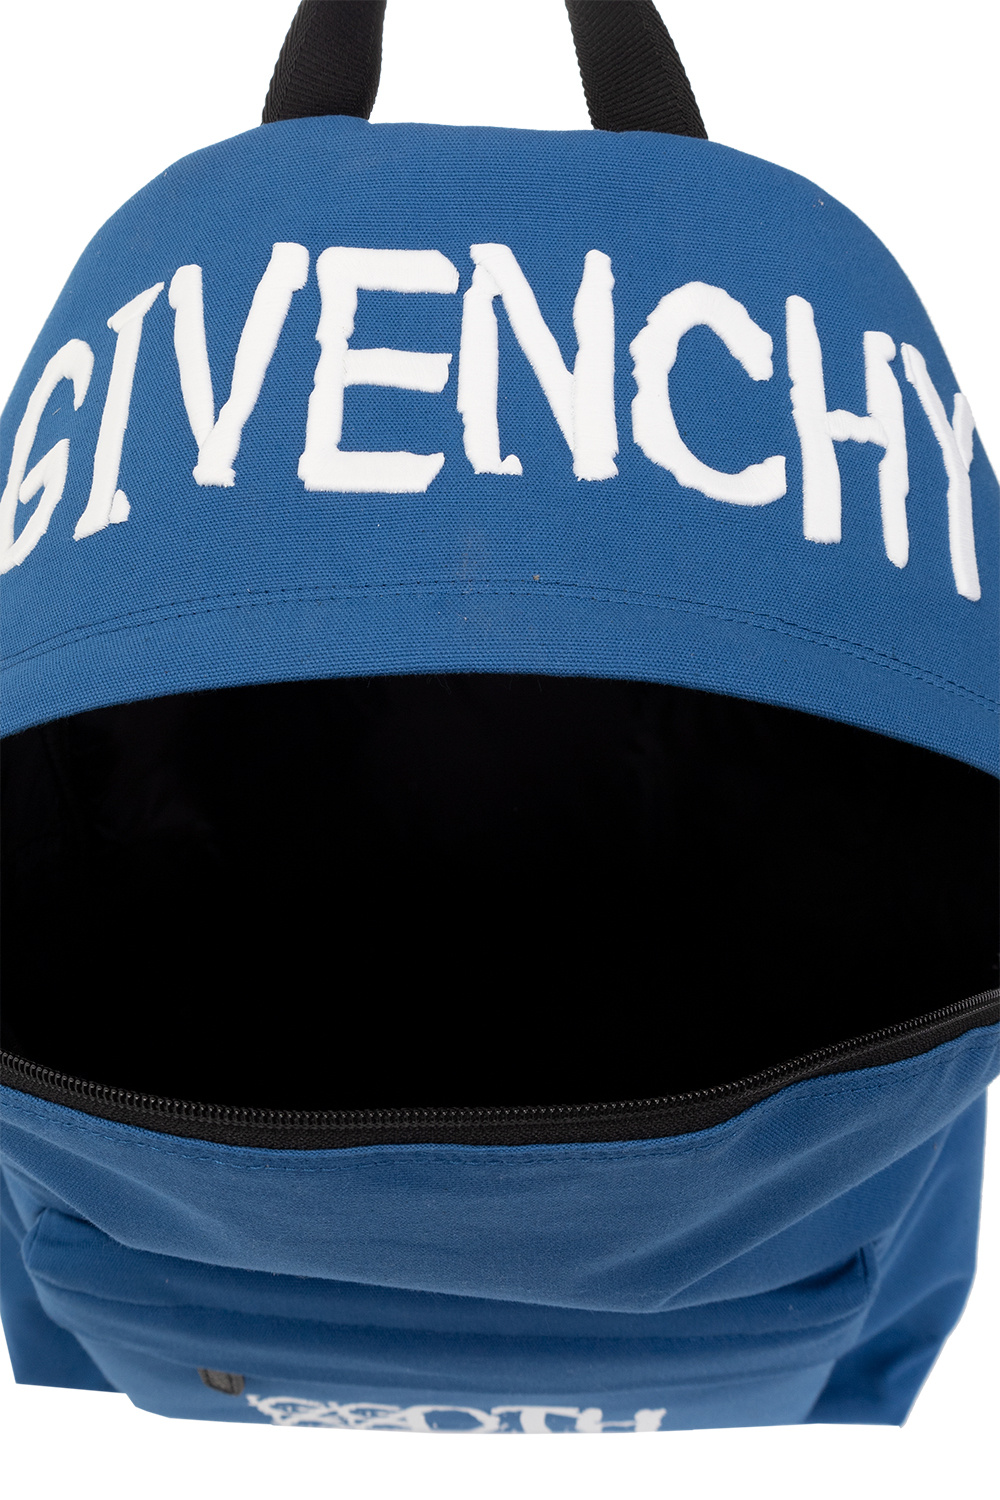 Givenchy Givenchy Мужские галстуки givenchy шелковые